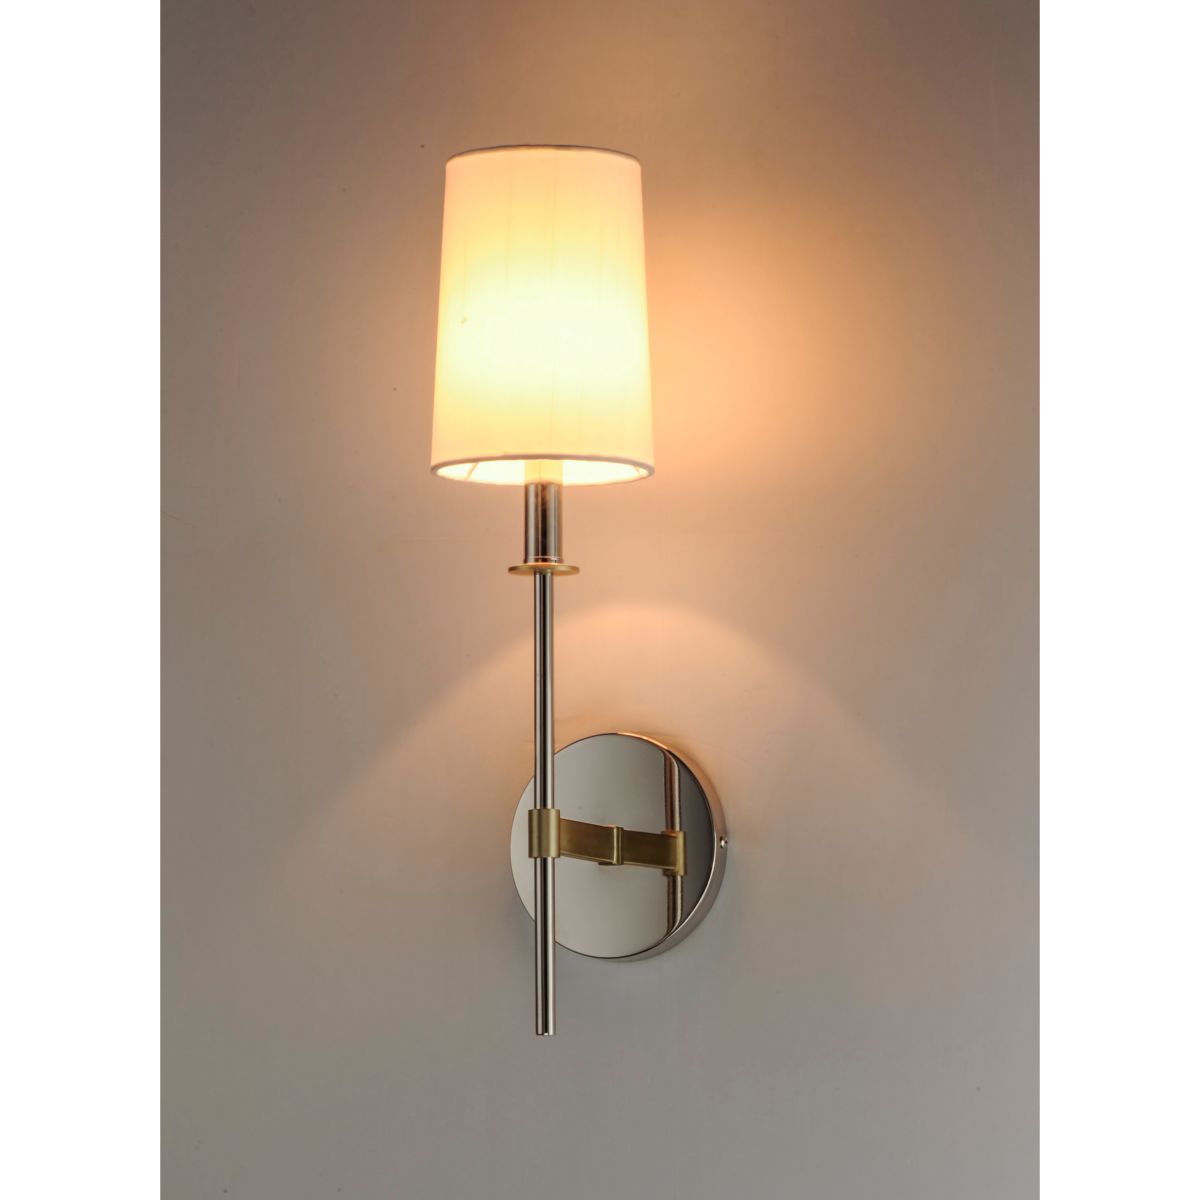 Uptown 20 in. Armed Sconce Polished Nickel finish